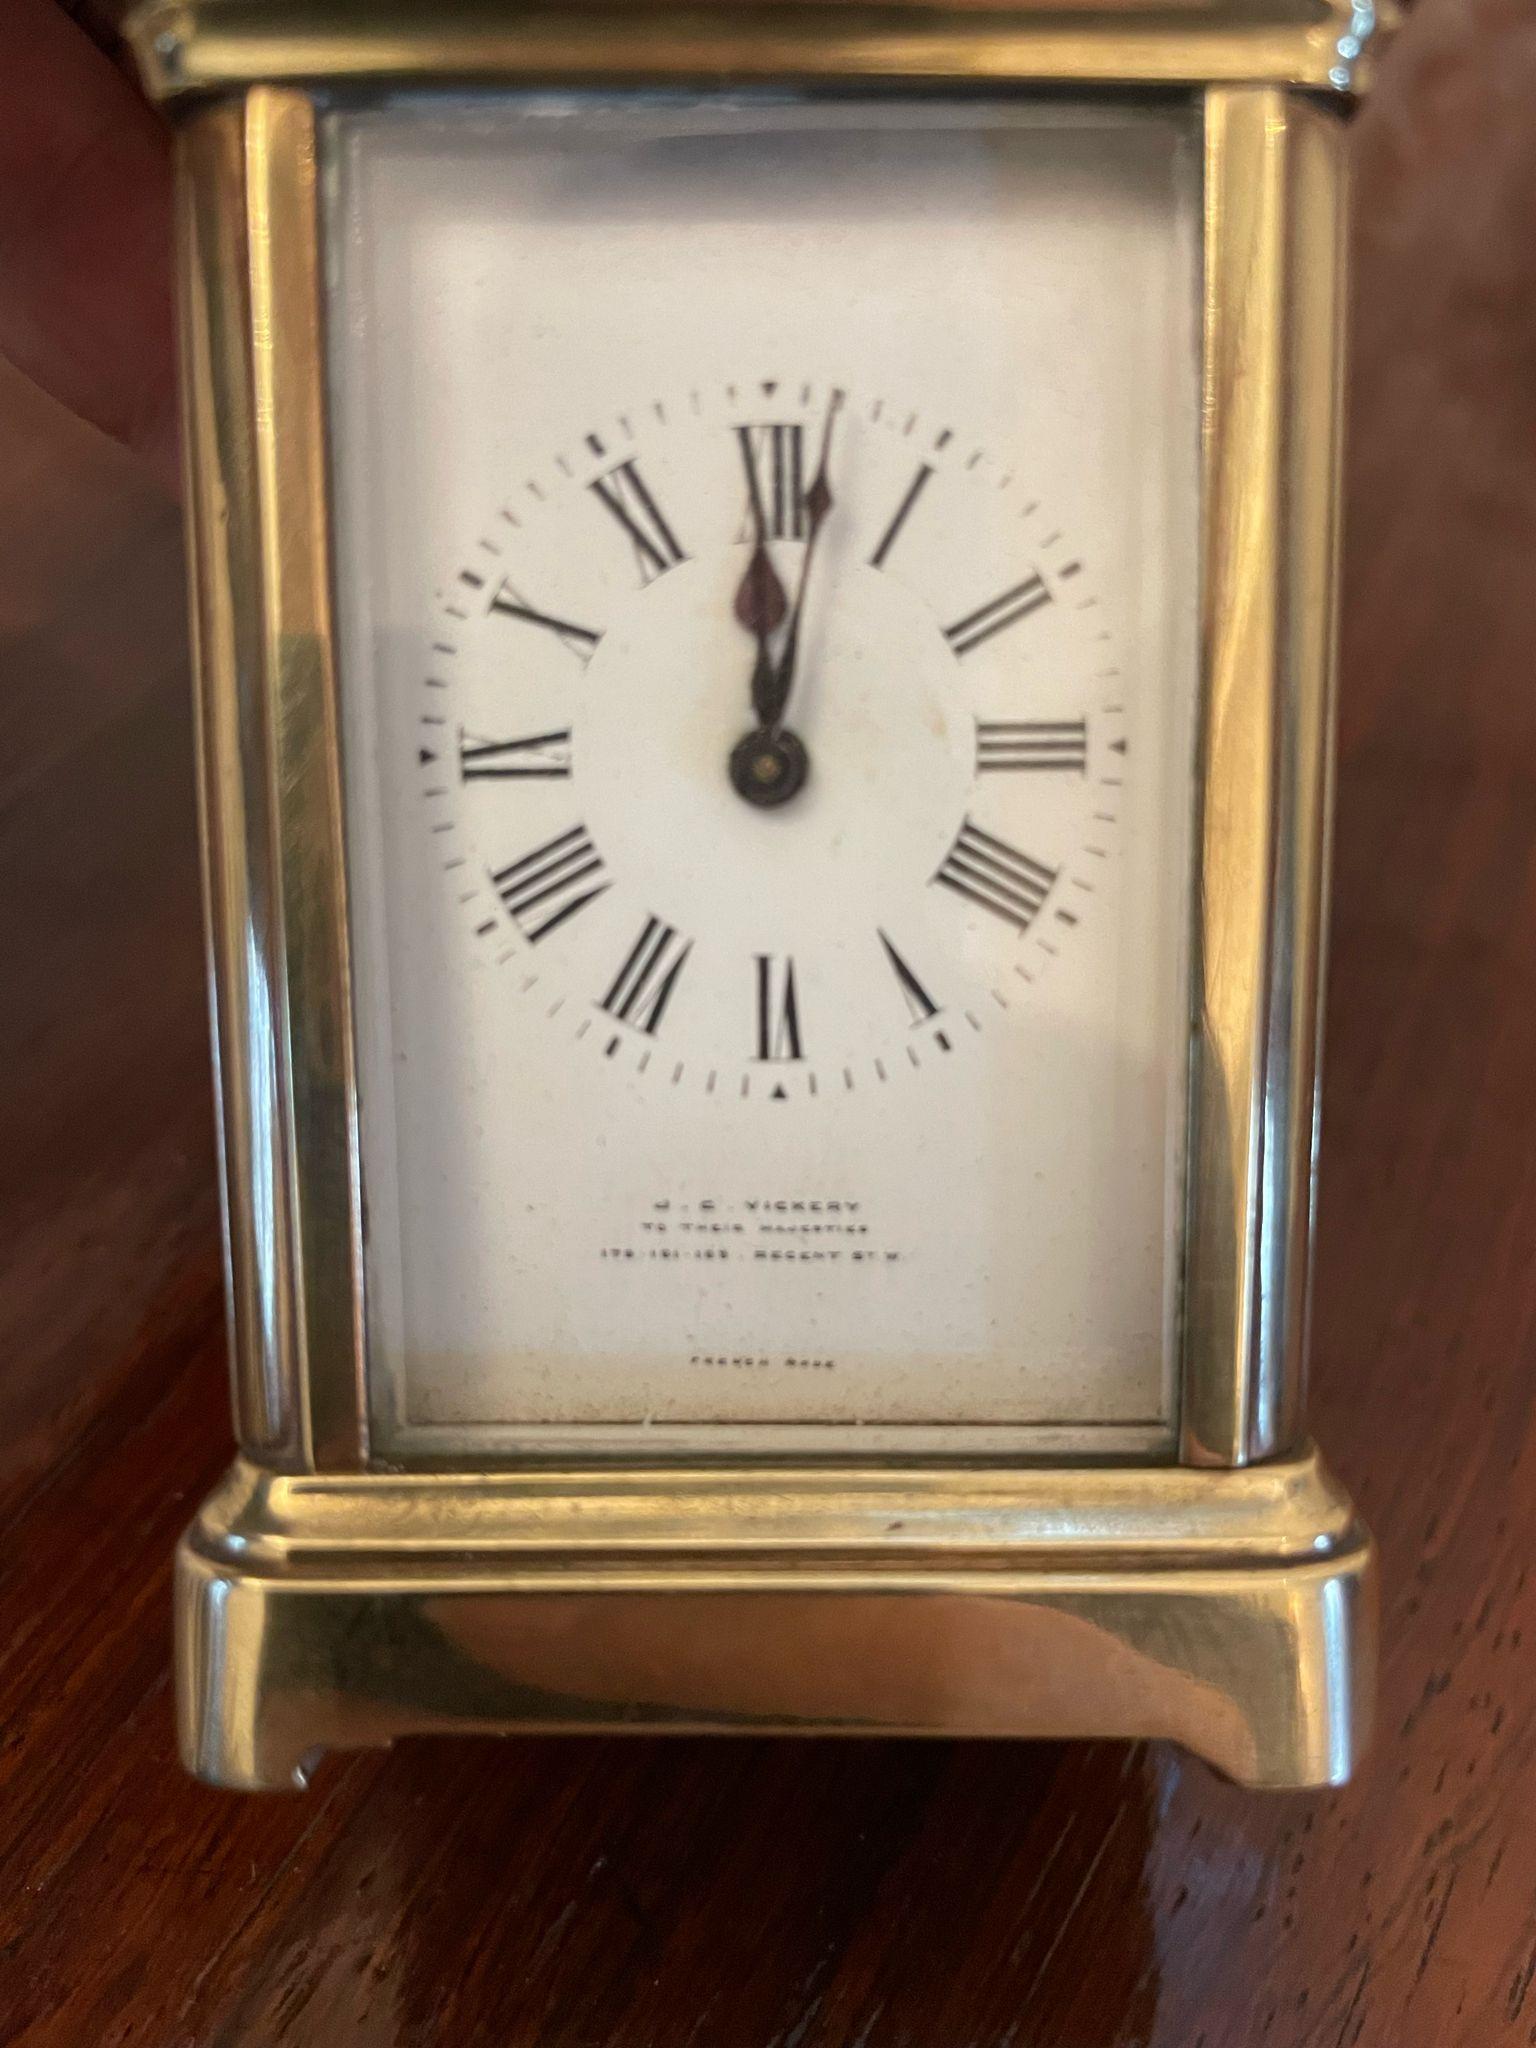 20th Century Antique Edwardian Quality Miniature Brass Carriage Clock By J C Vickery, London For Sale